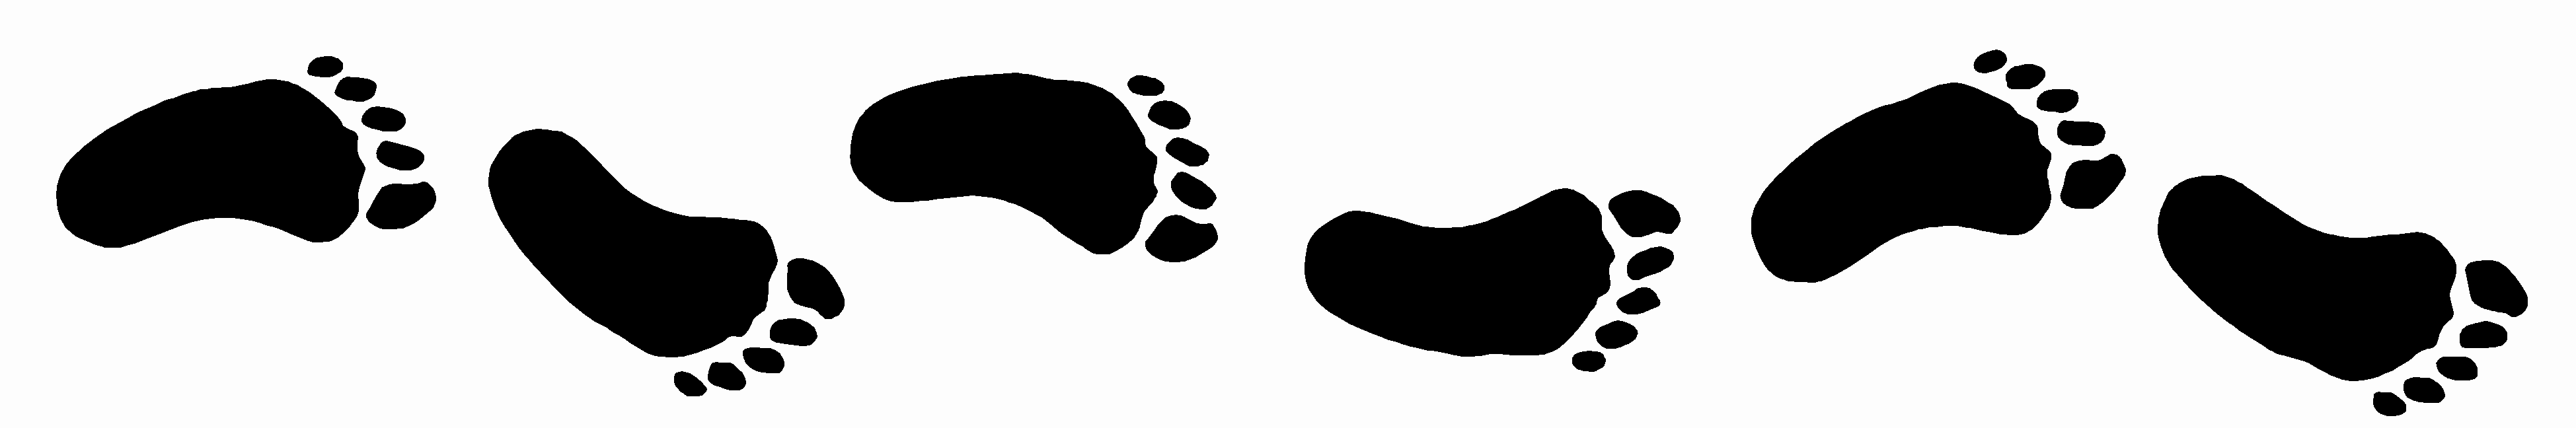 Feet clipart small foot. Footsteps free download best